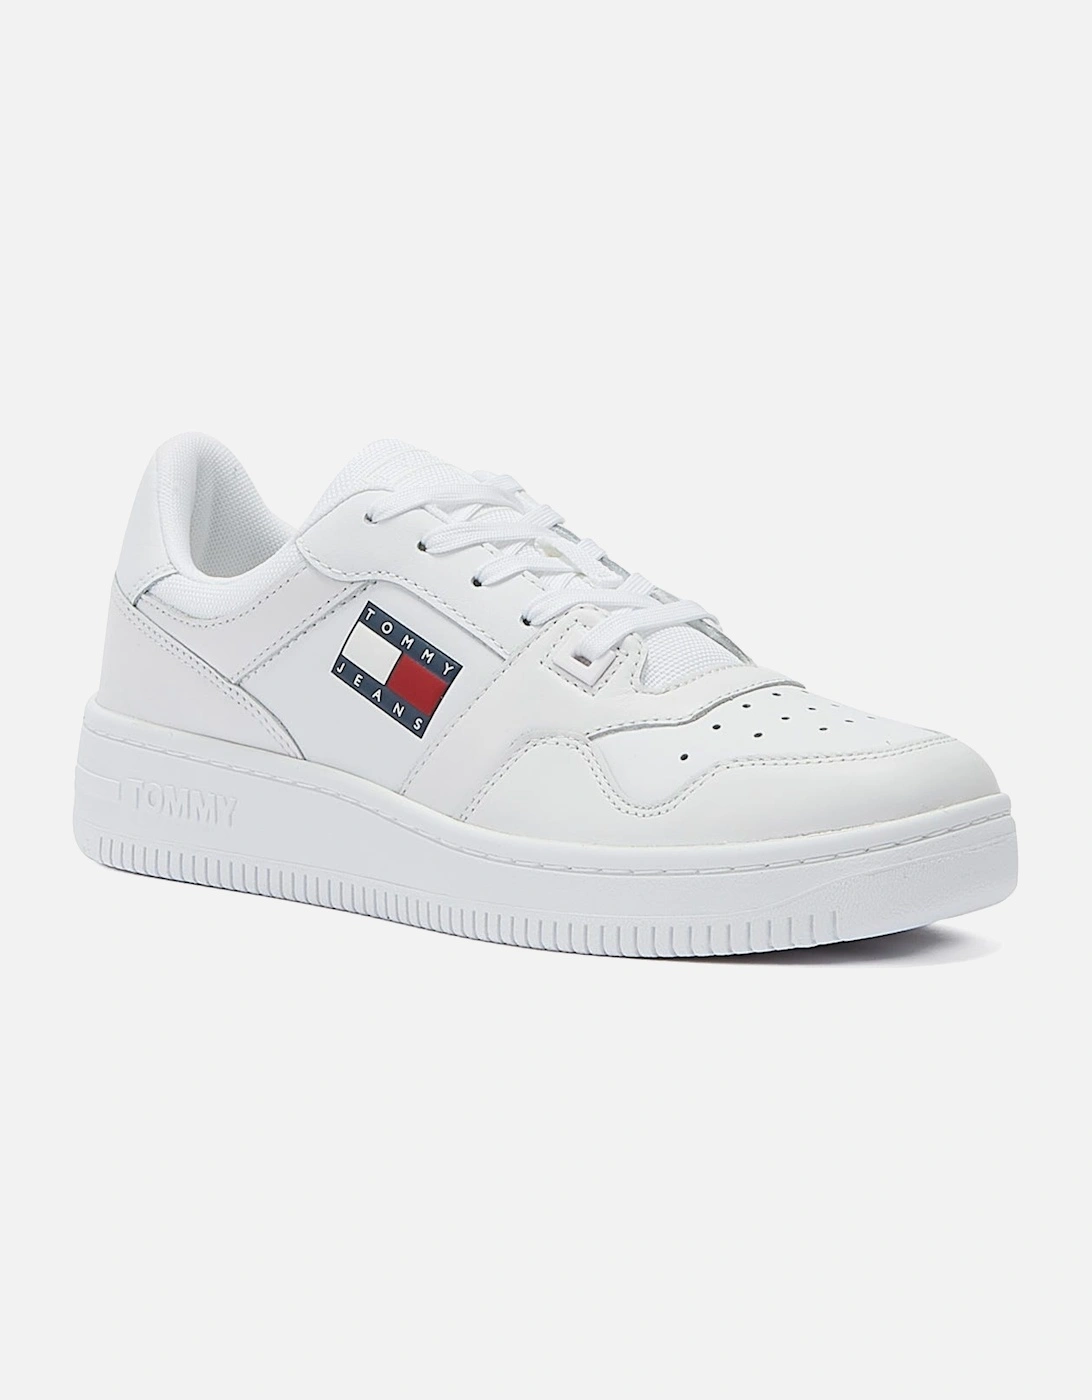 Jeans Retro Basket Mens White Leather Trainers